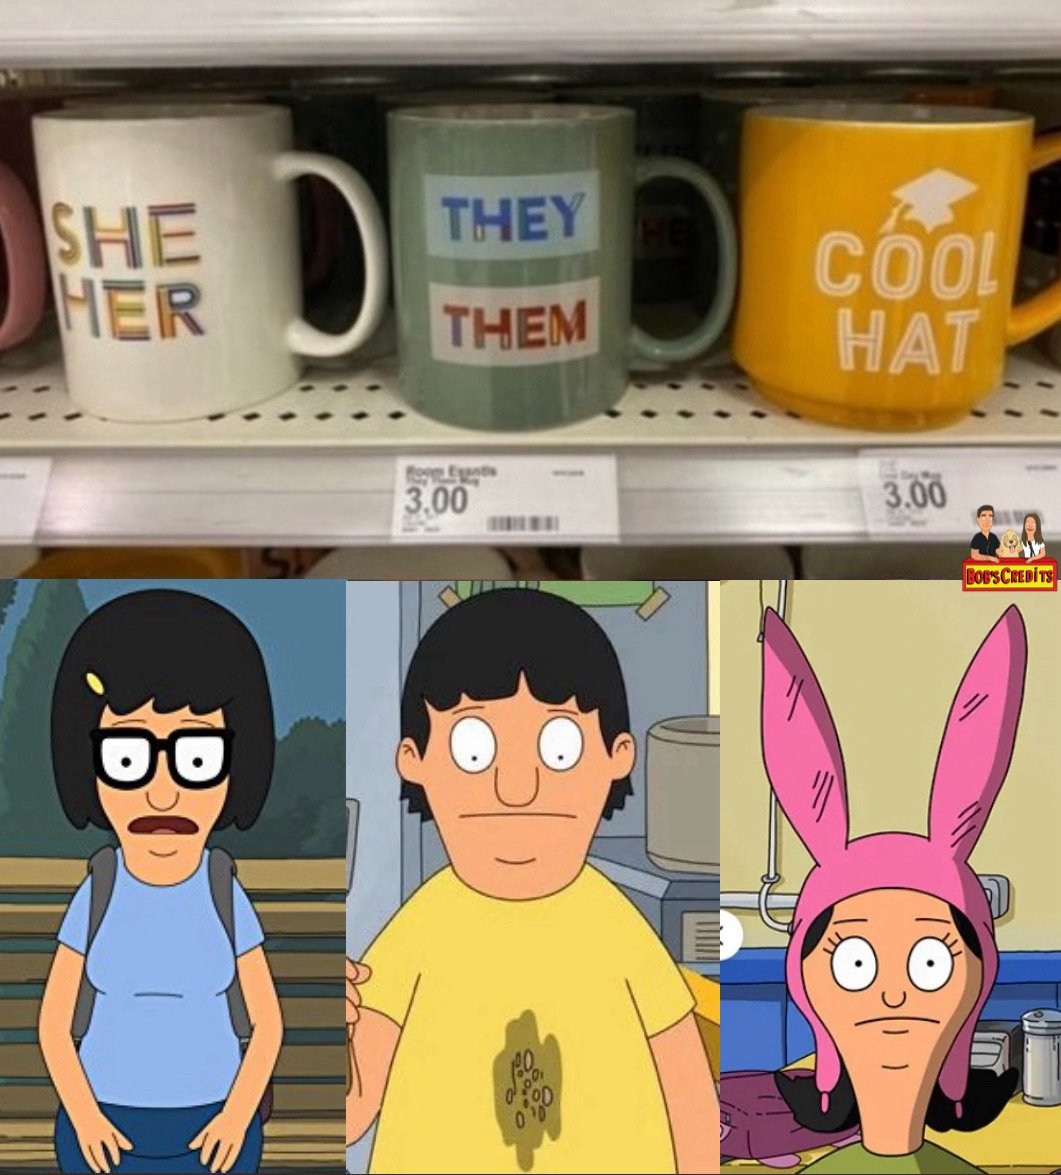 26-Best-Bobs-Burgers-Memes-Moments-she-her-they-them-cool-hat-tina-gene-louise.JPG